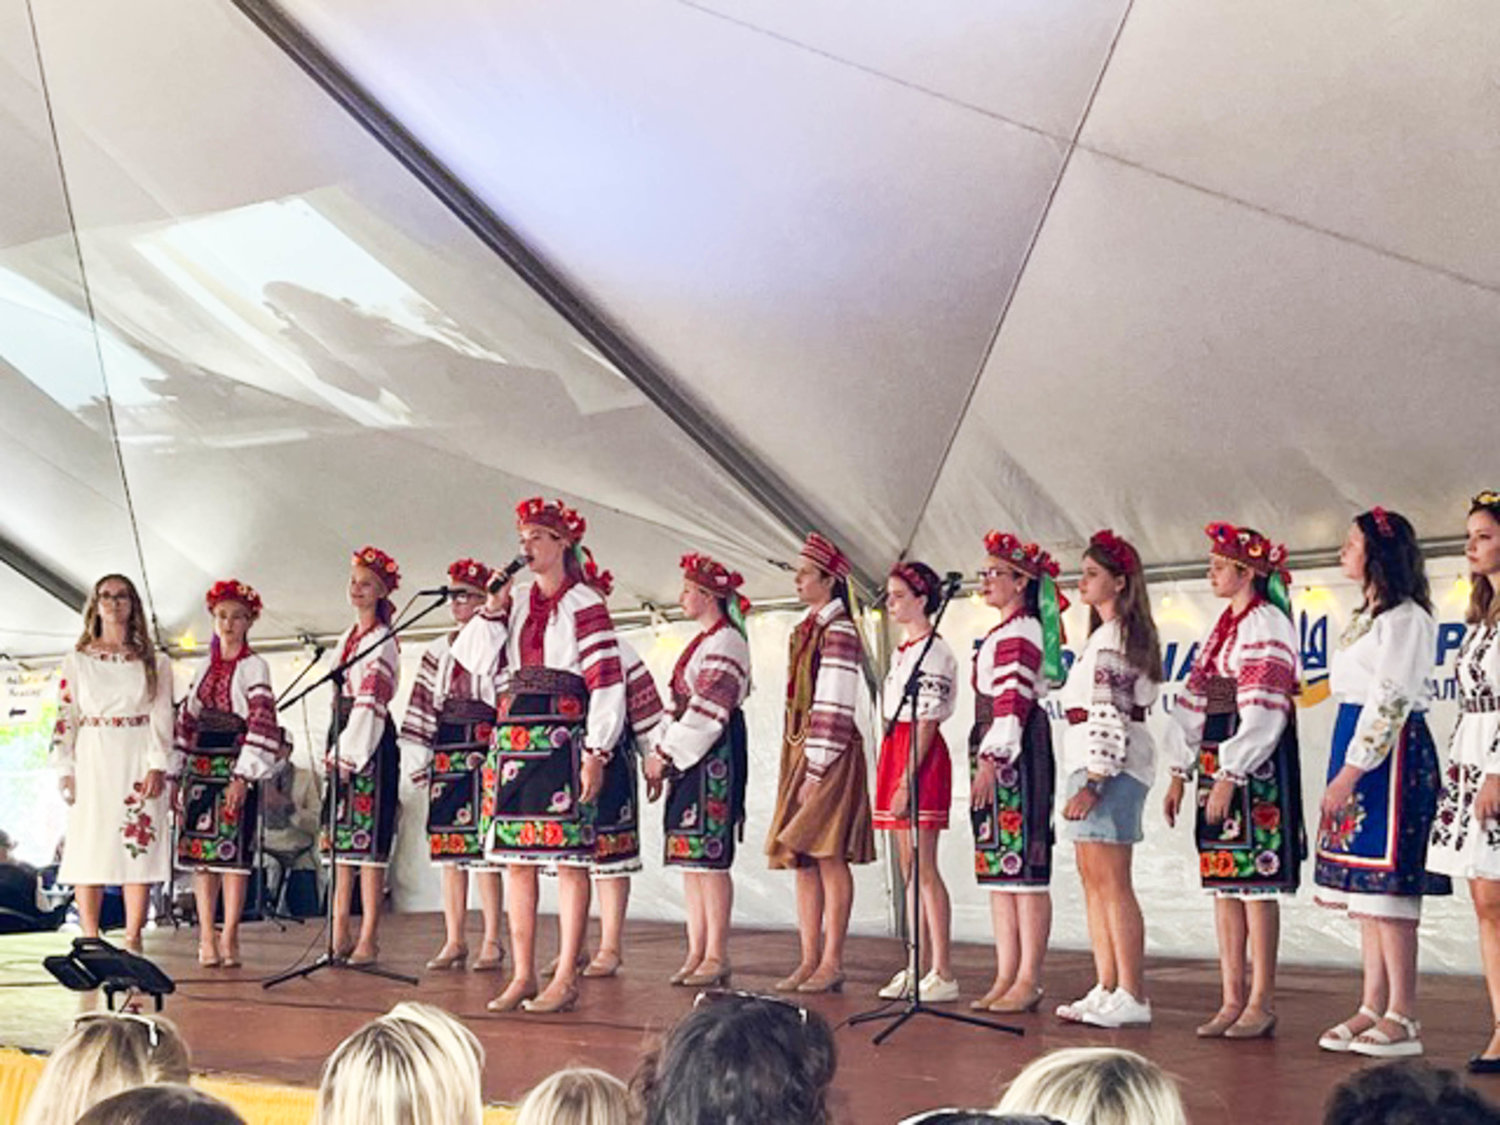 The Ukrainian Vocal Ensemble Kalyna from St. John the Baptist Ukrainian Catholic Church in Syracuse will perform Oct. 29 at the YMCA of the Greater Tri-Valley’s annual Prayer Breakfast. Tickets are $20 per person and available on the YMCA of the Greater Tri-Valley website, ymcatrivalley.org or at the Oneida and Rome branches.